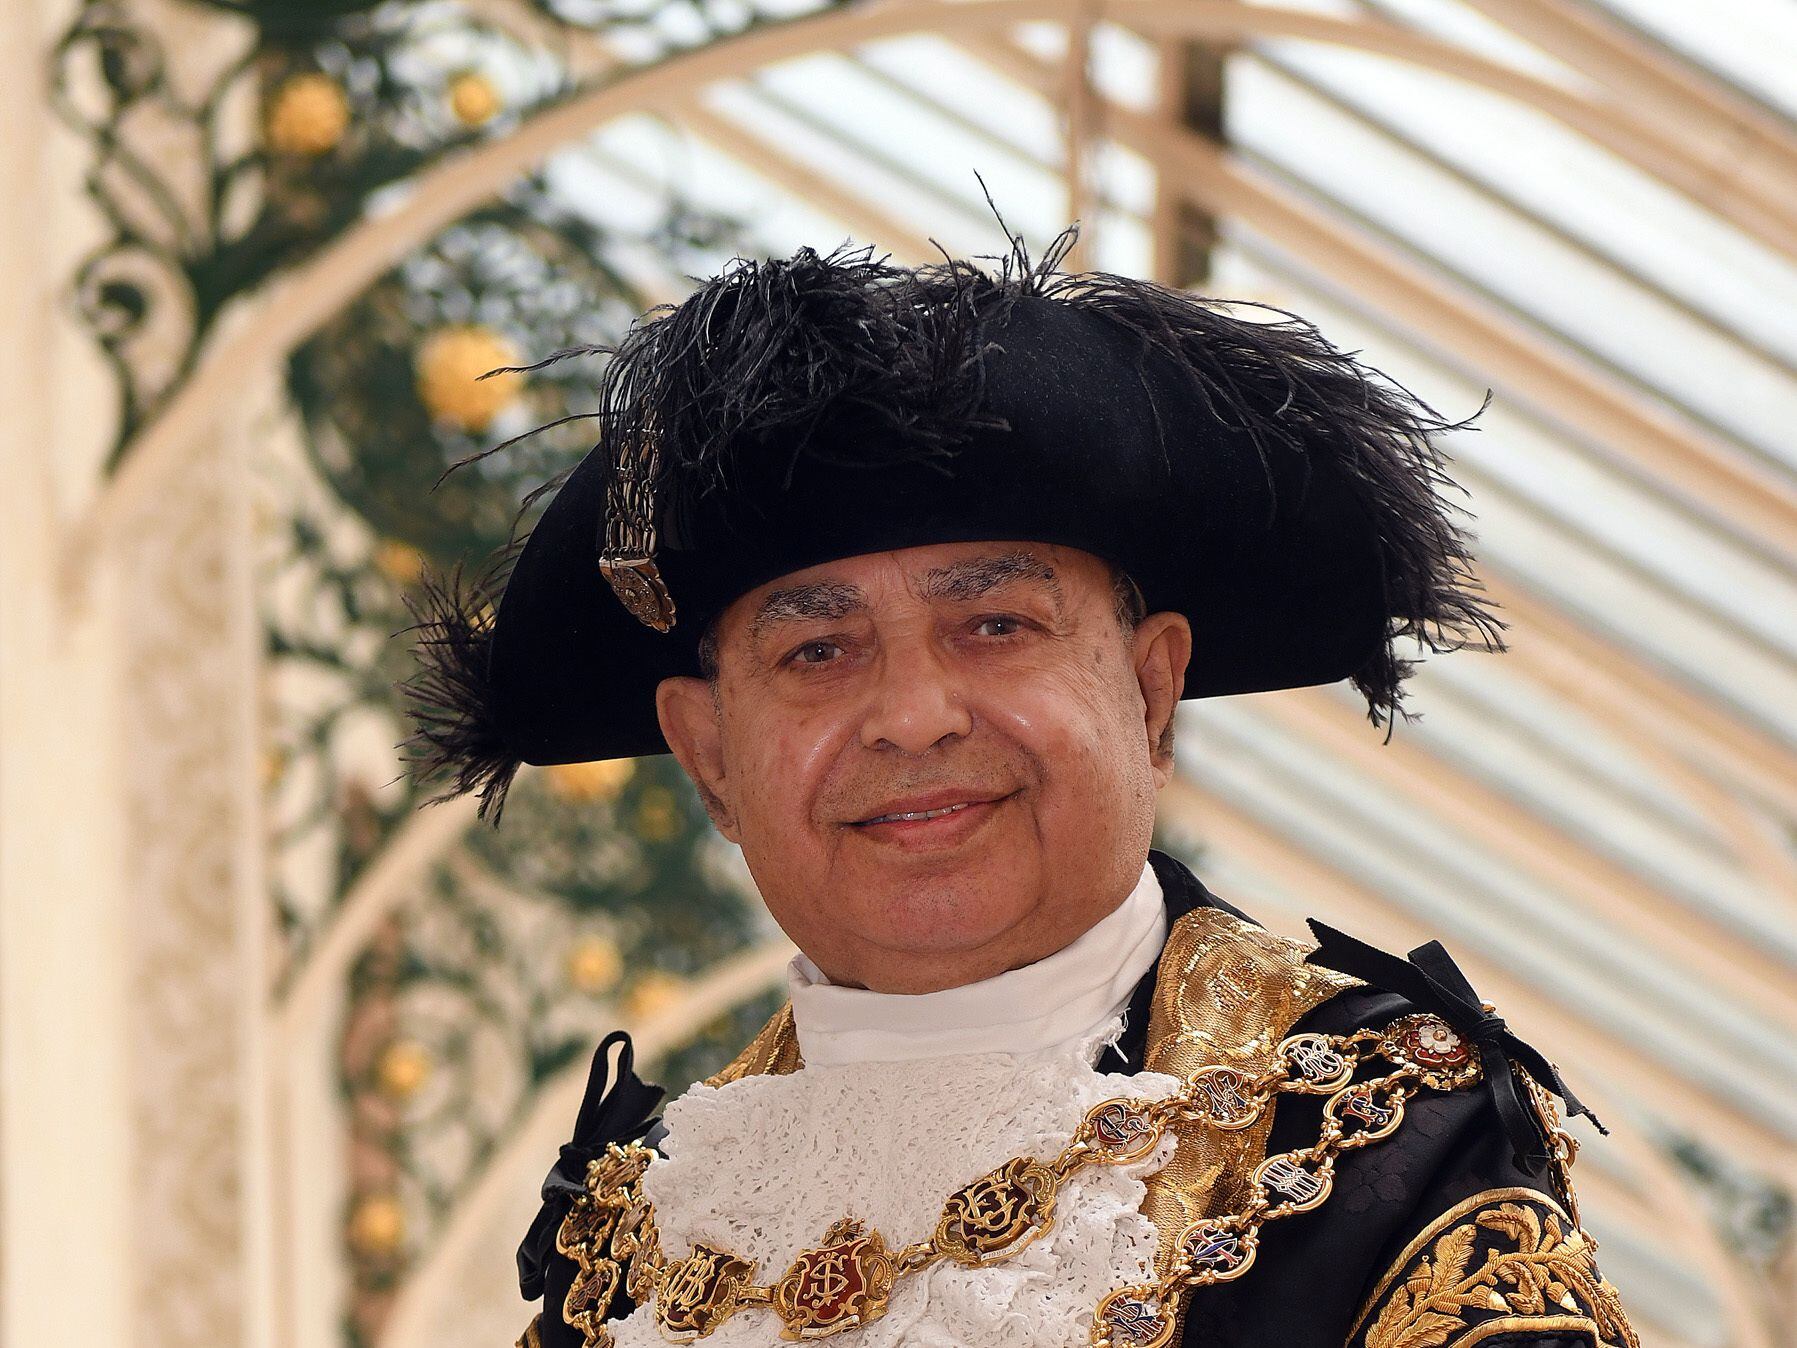 Birmingham Lord Mayor jetting off to Pakistan as part of Commonwealth Games preparations